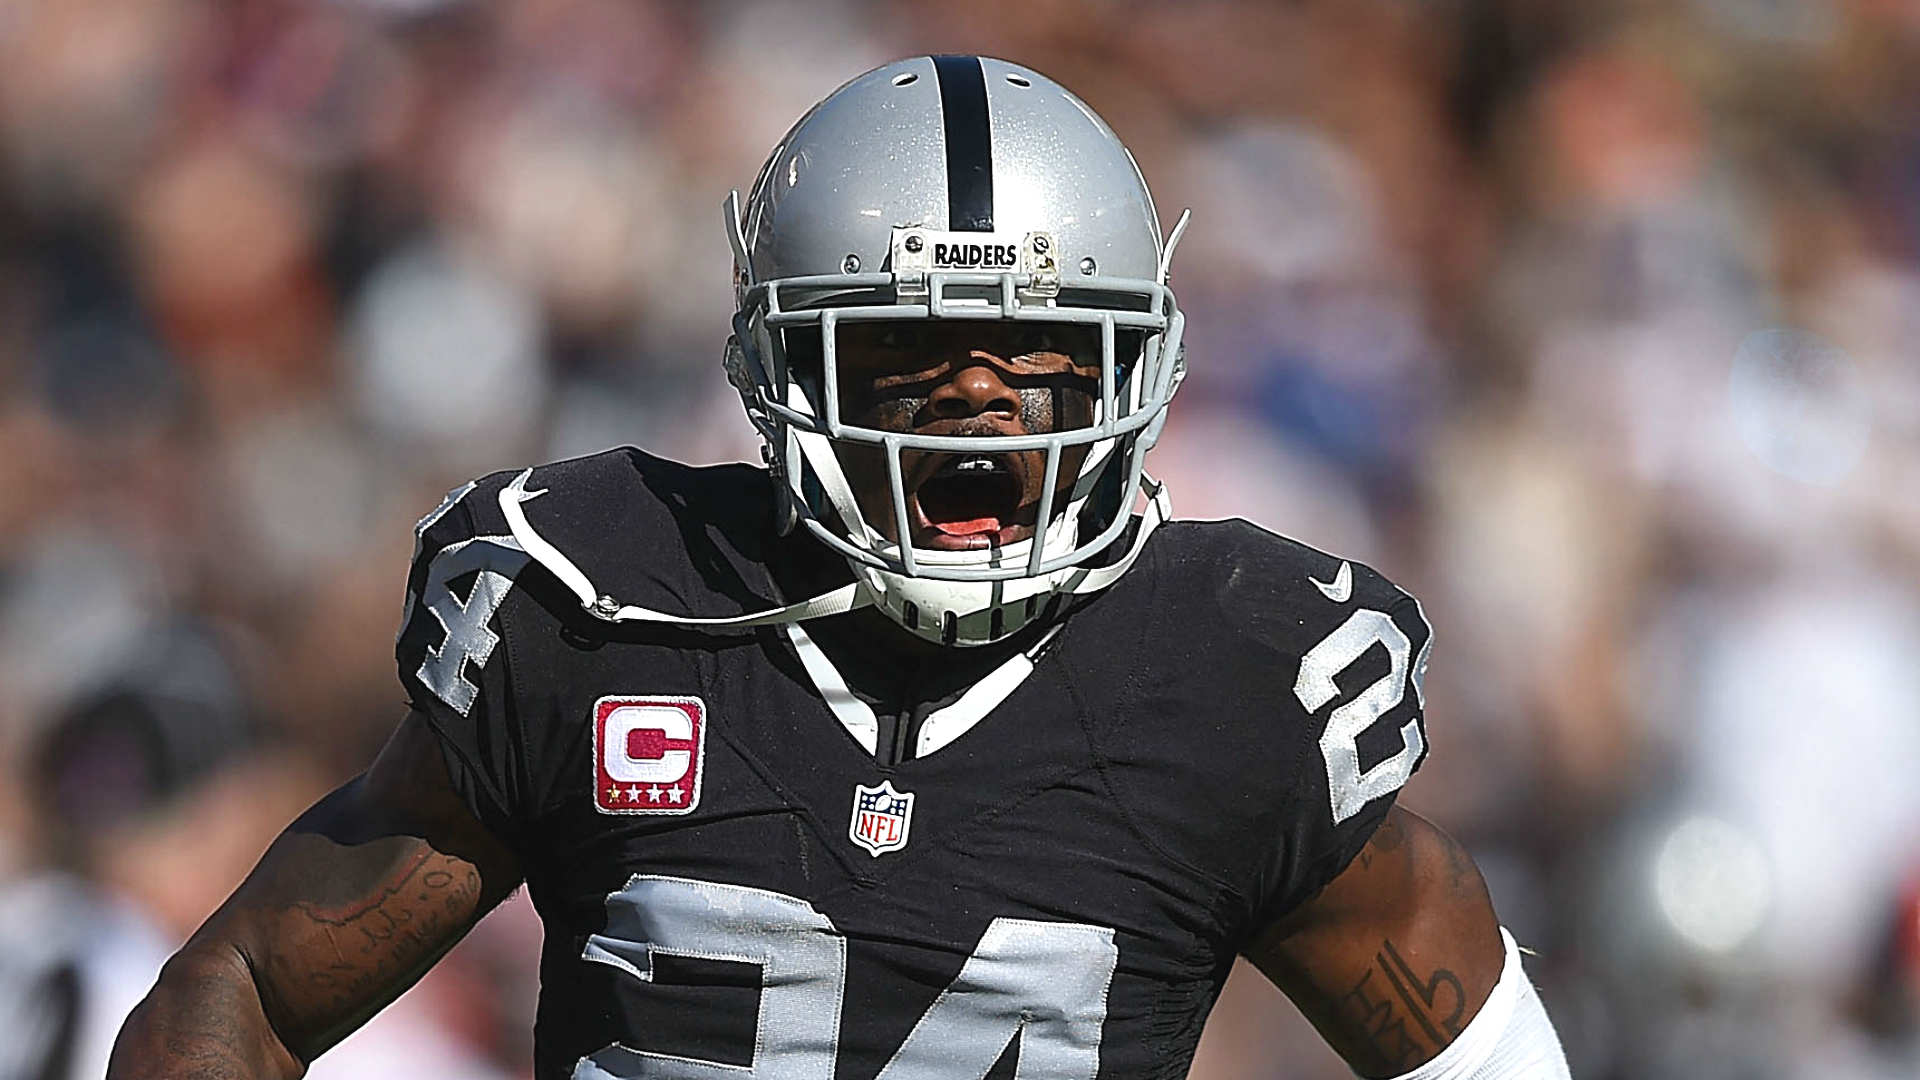 Charles Woodson will retire at season's end